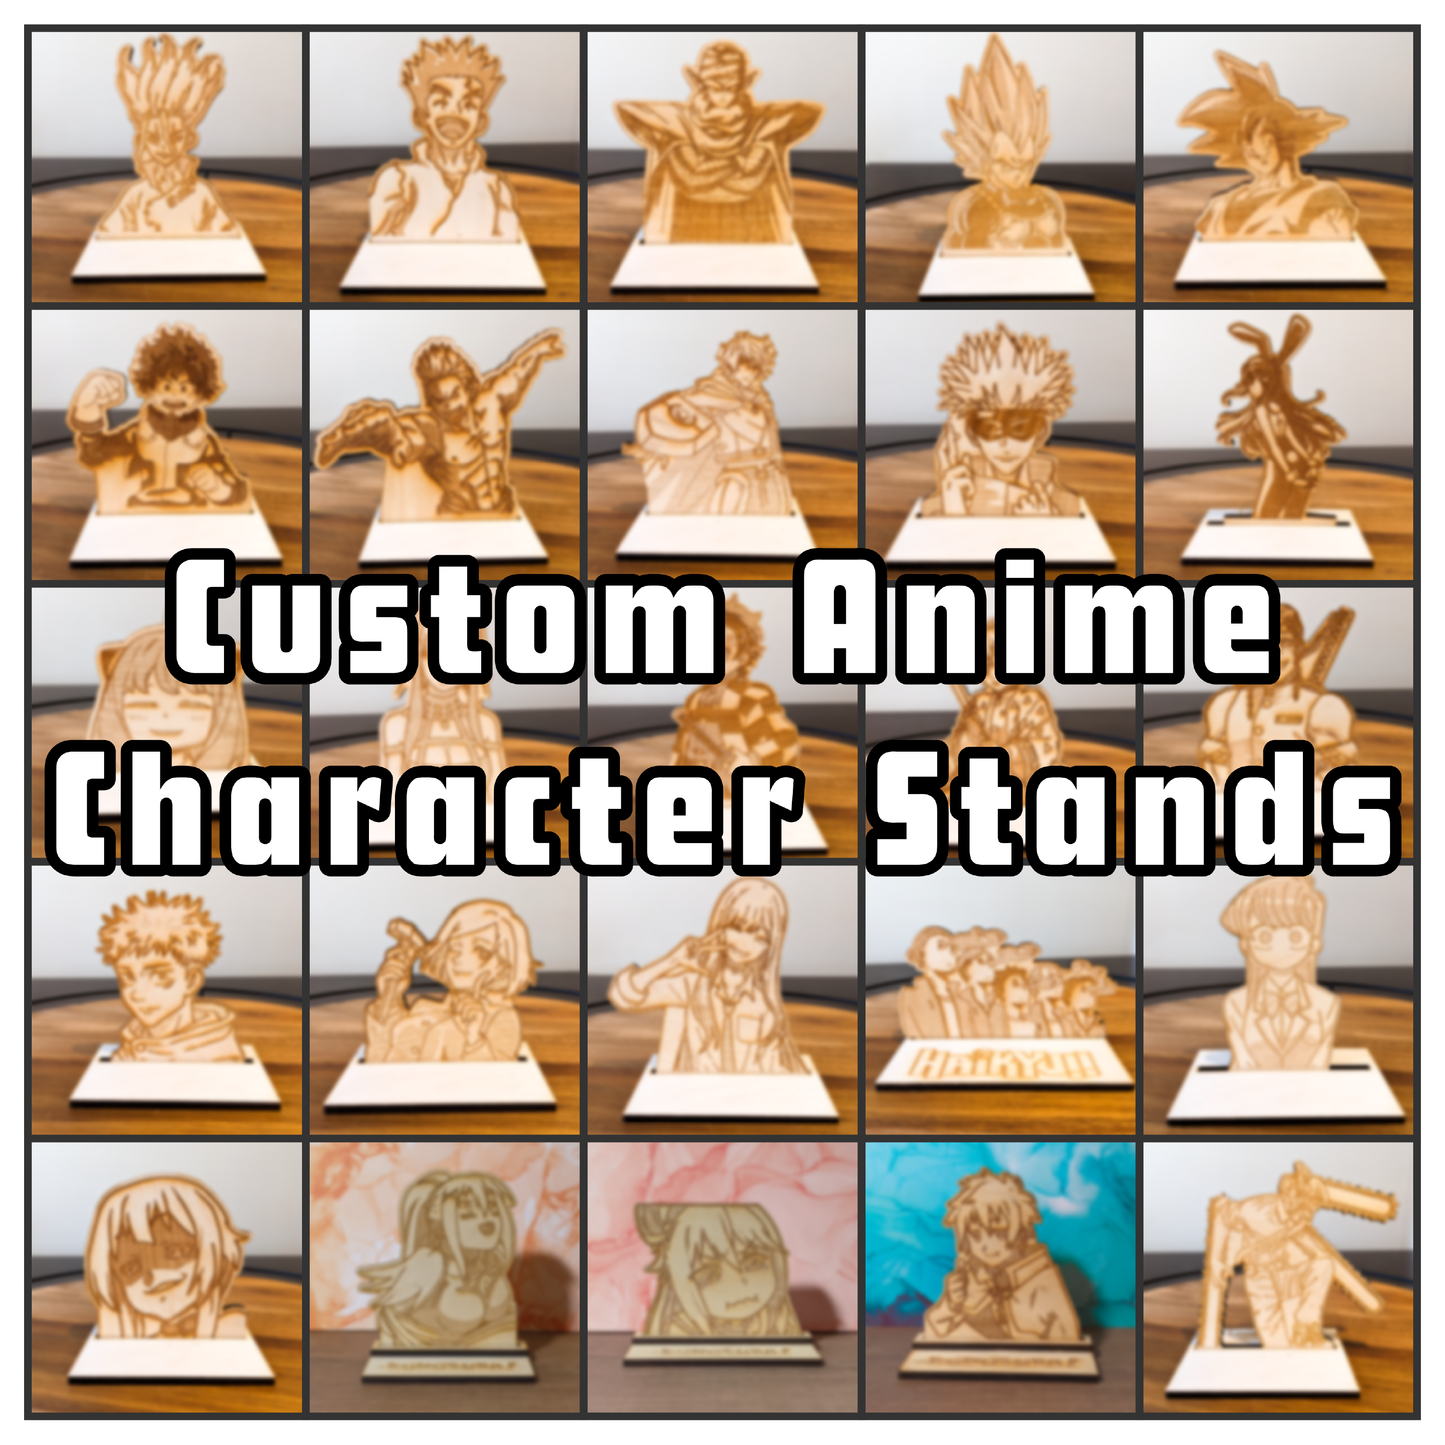 Character Stand - Custom Order